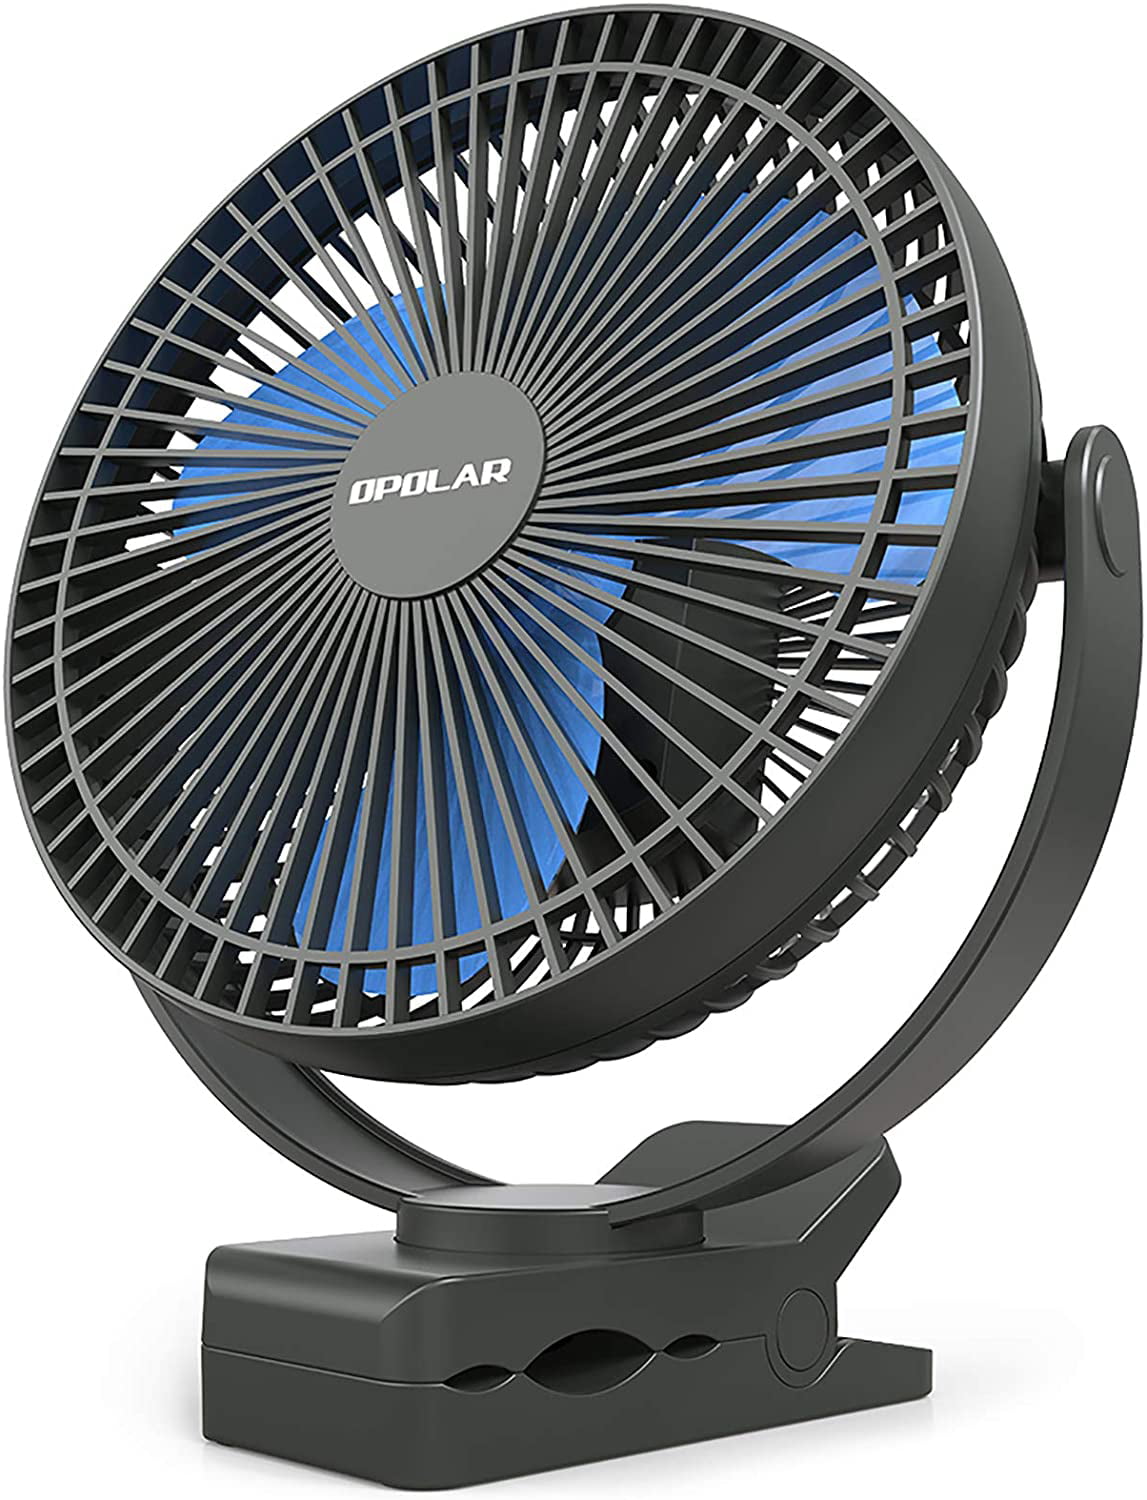 7'' Clip-on Table Fan Strong Airflow USB Powered Cooling Quiet Home 